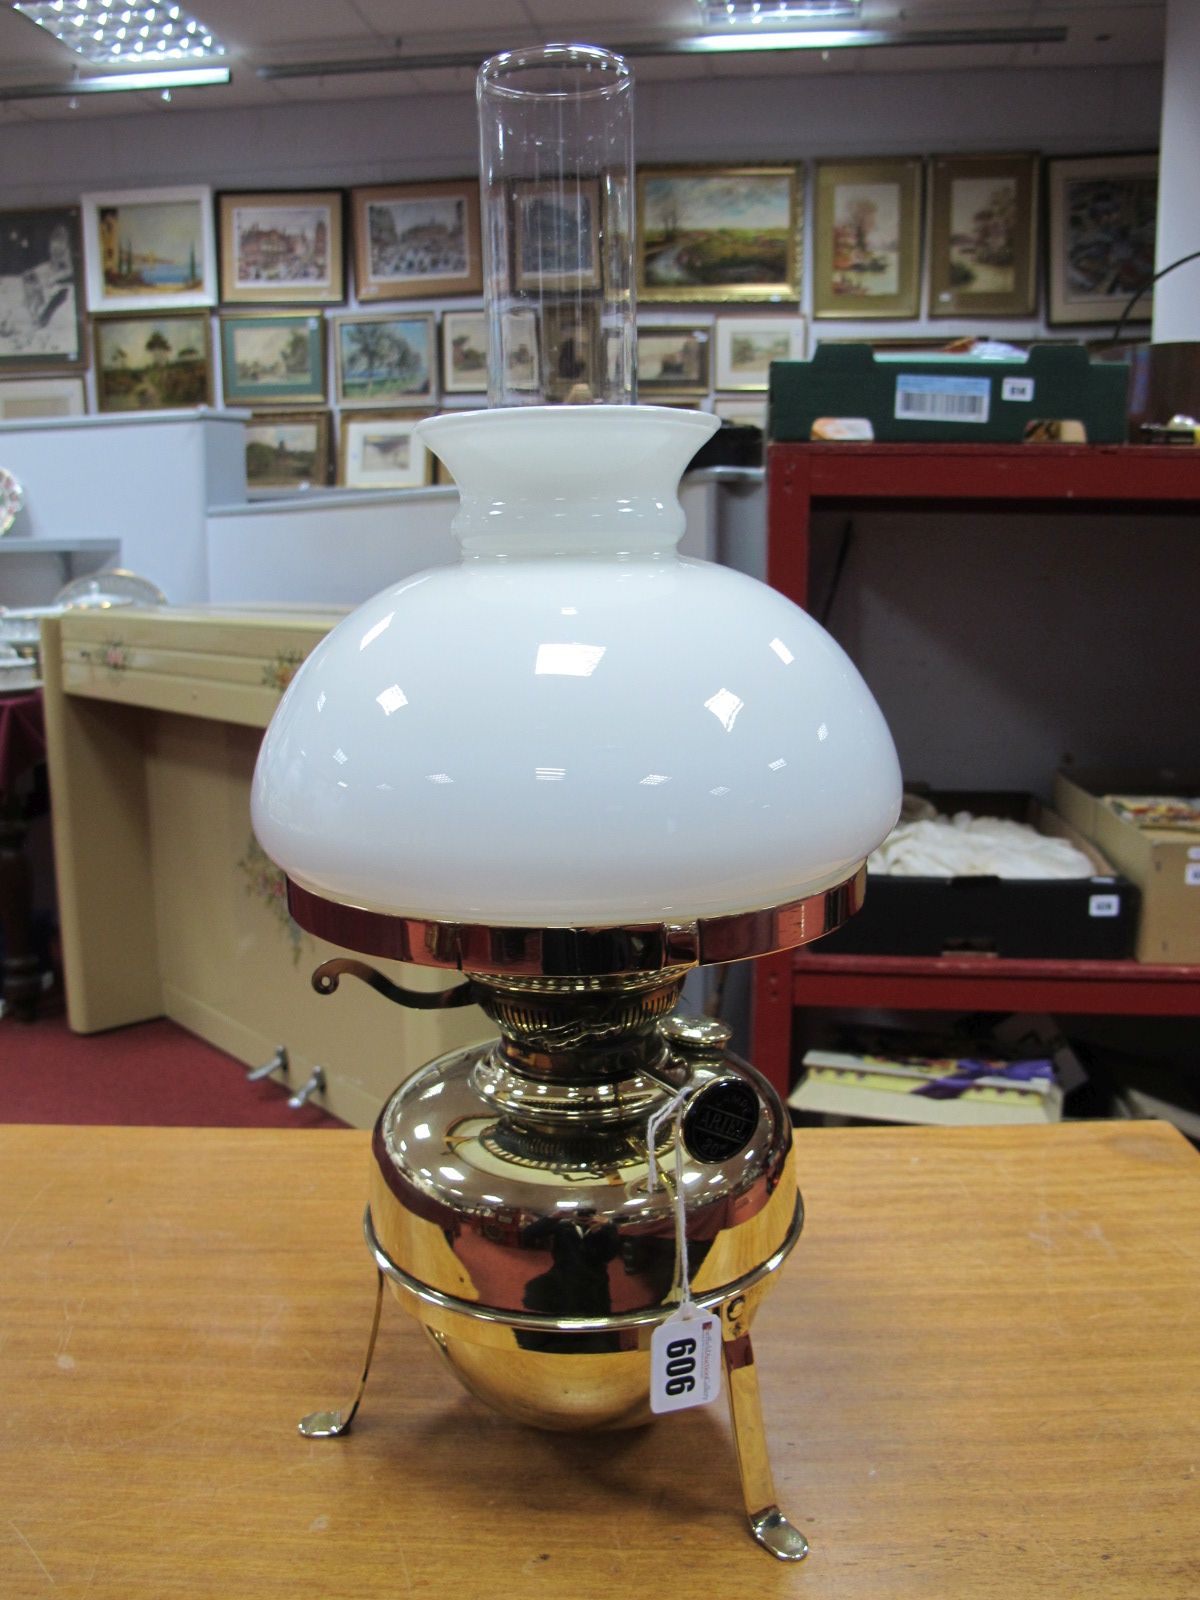 Lampe Ariel 20 Brass Oil Lamp, with glass funnel white glass shade, brass well on a brass stand.